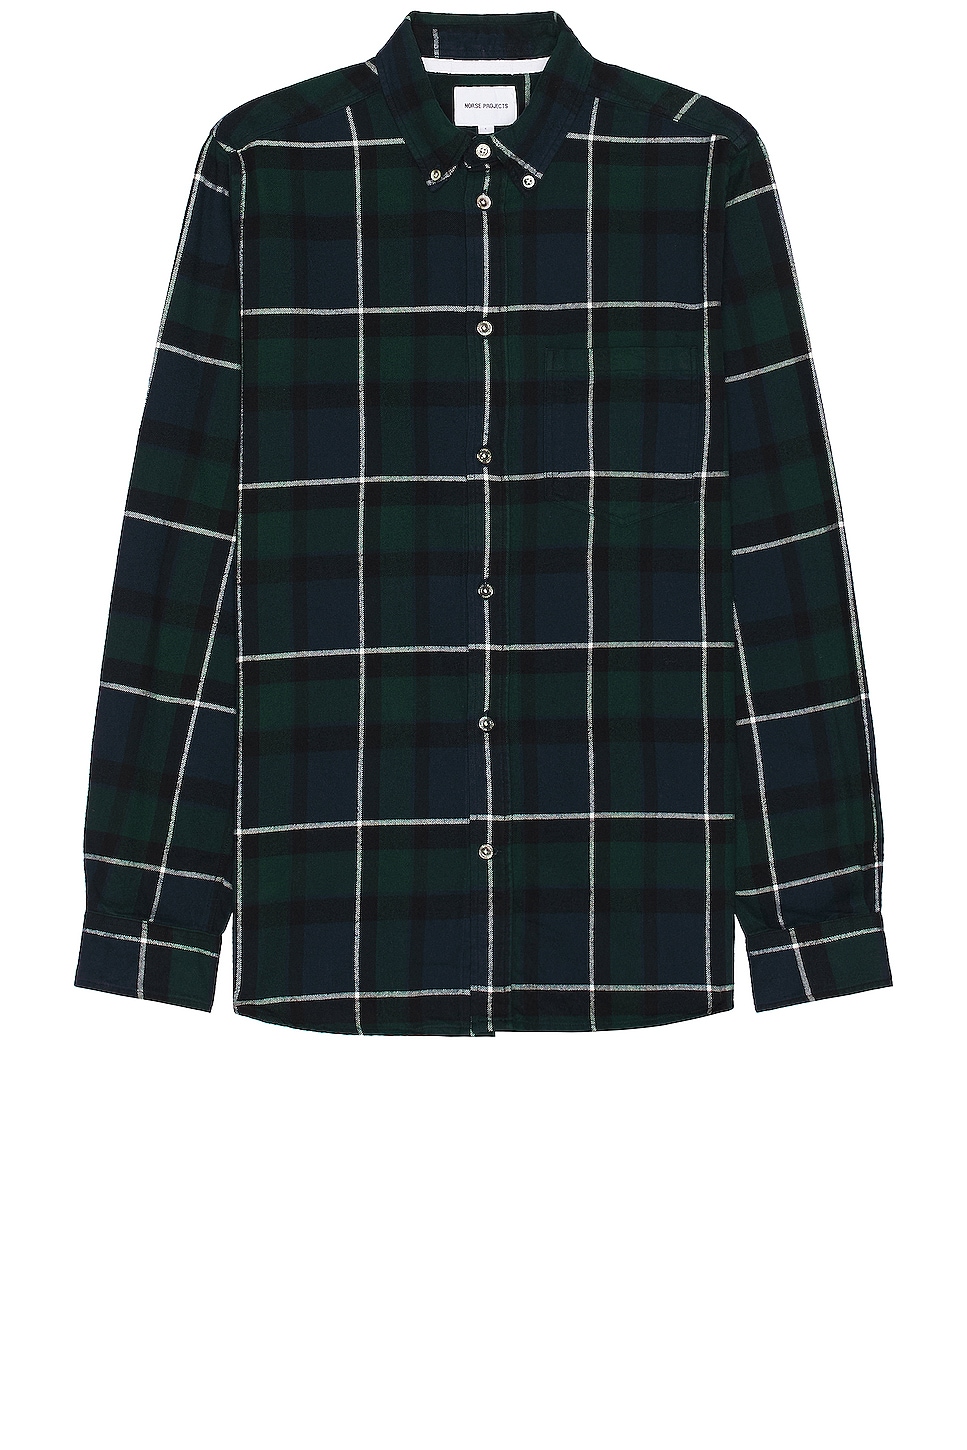 Image 1 of Norse Projects Anton Organic Flannel Check Shirt in Black Watch Check